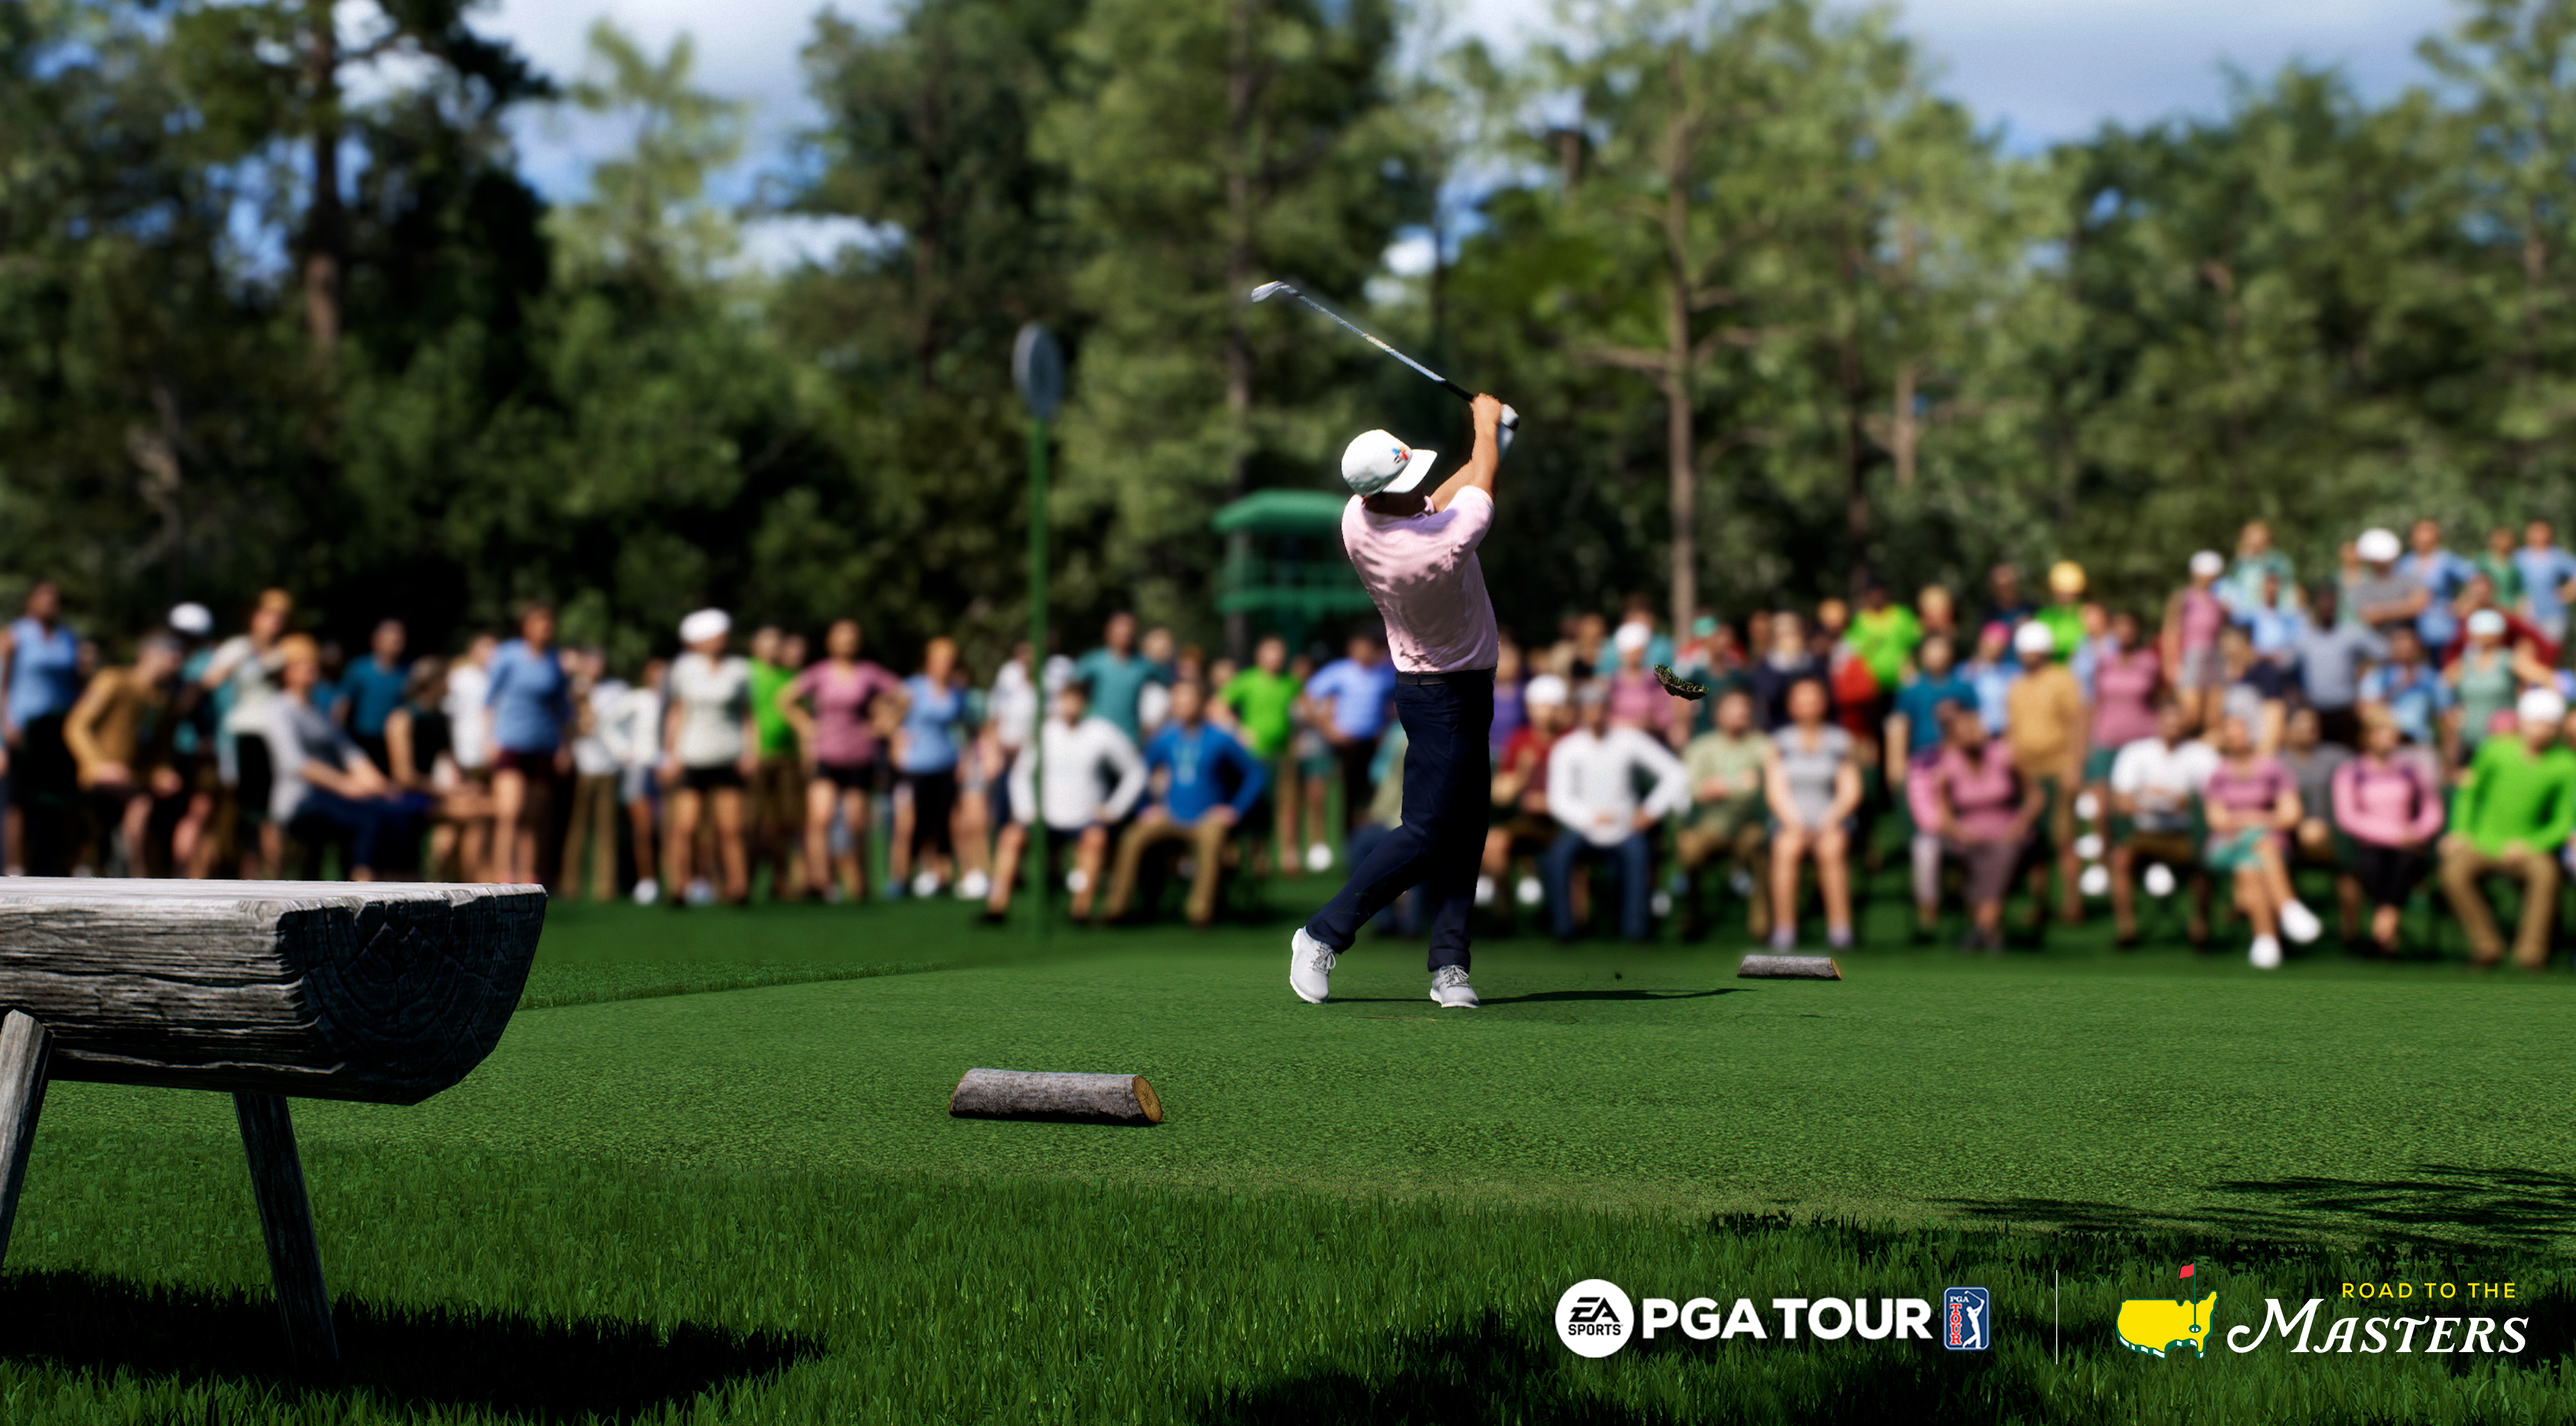 A driver in his foreswing on a tee shot at The Masters Tournament in EA Sports PGA Tour